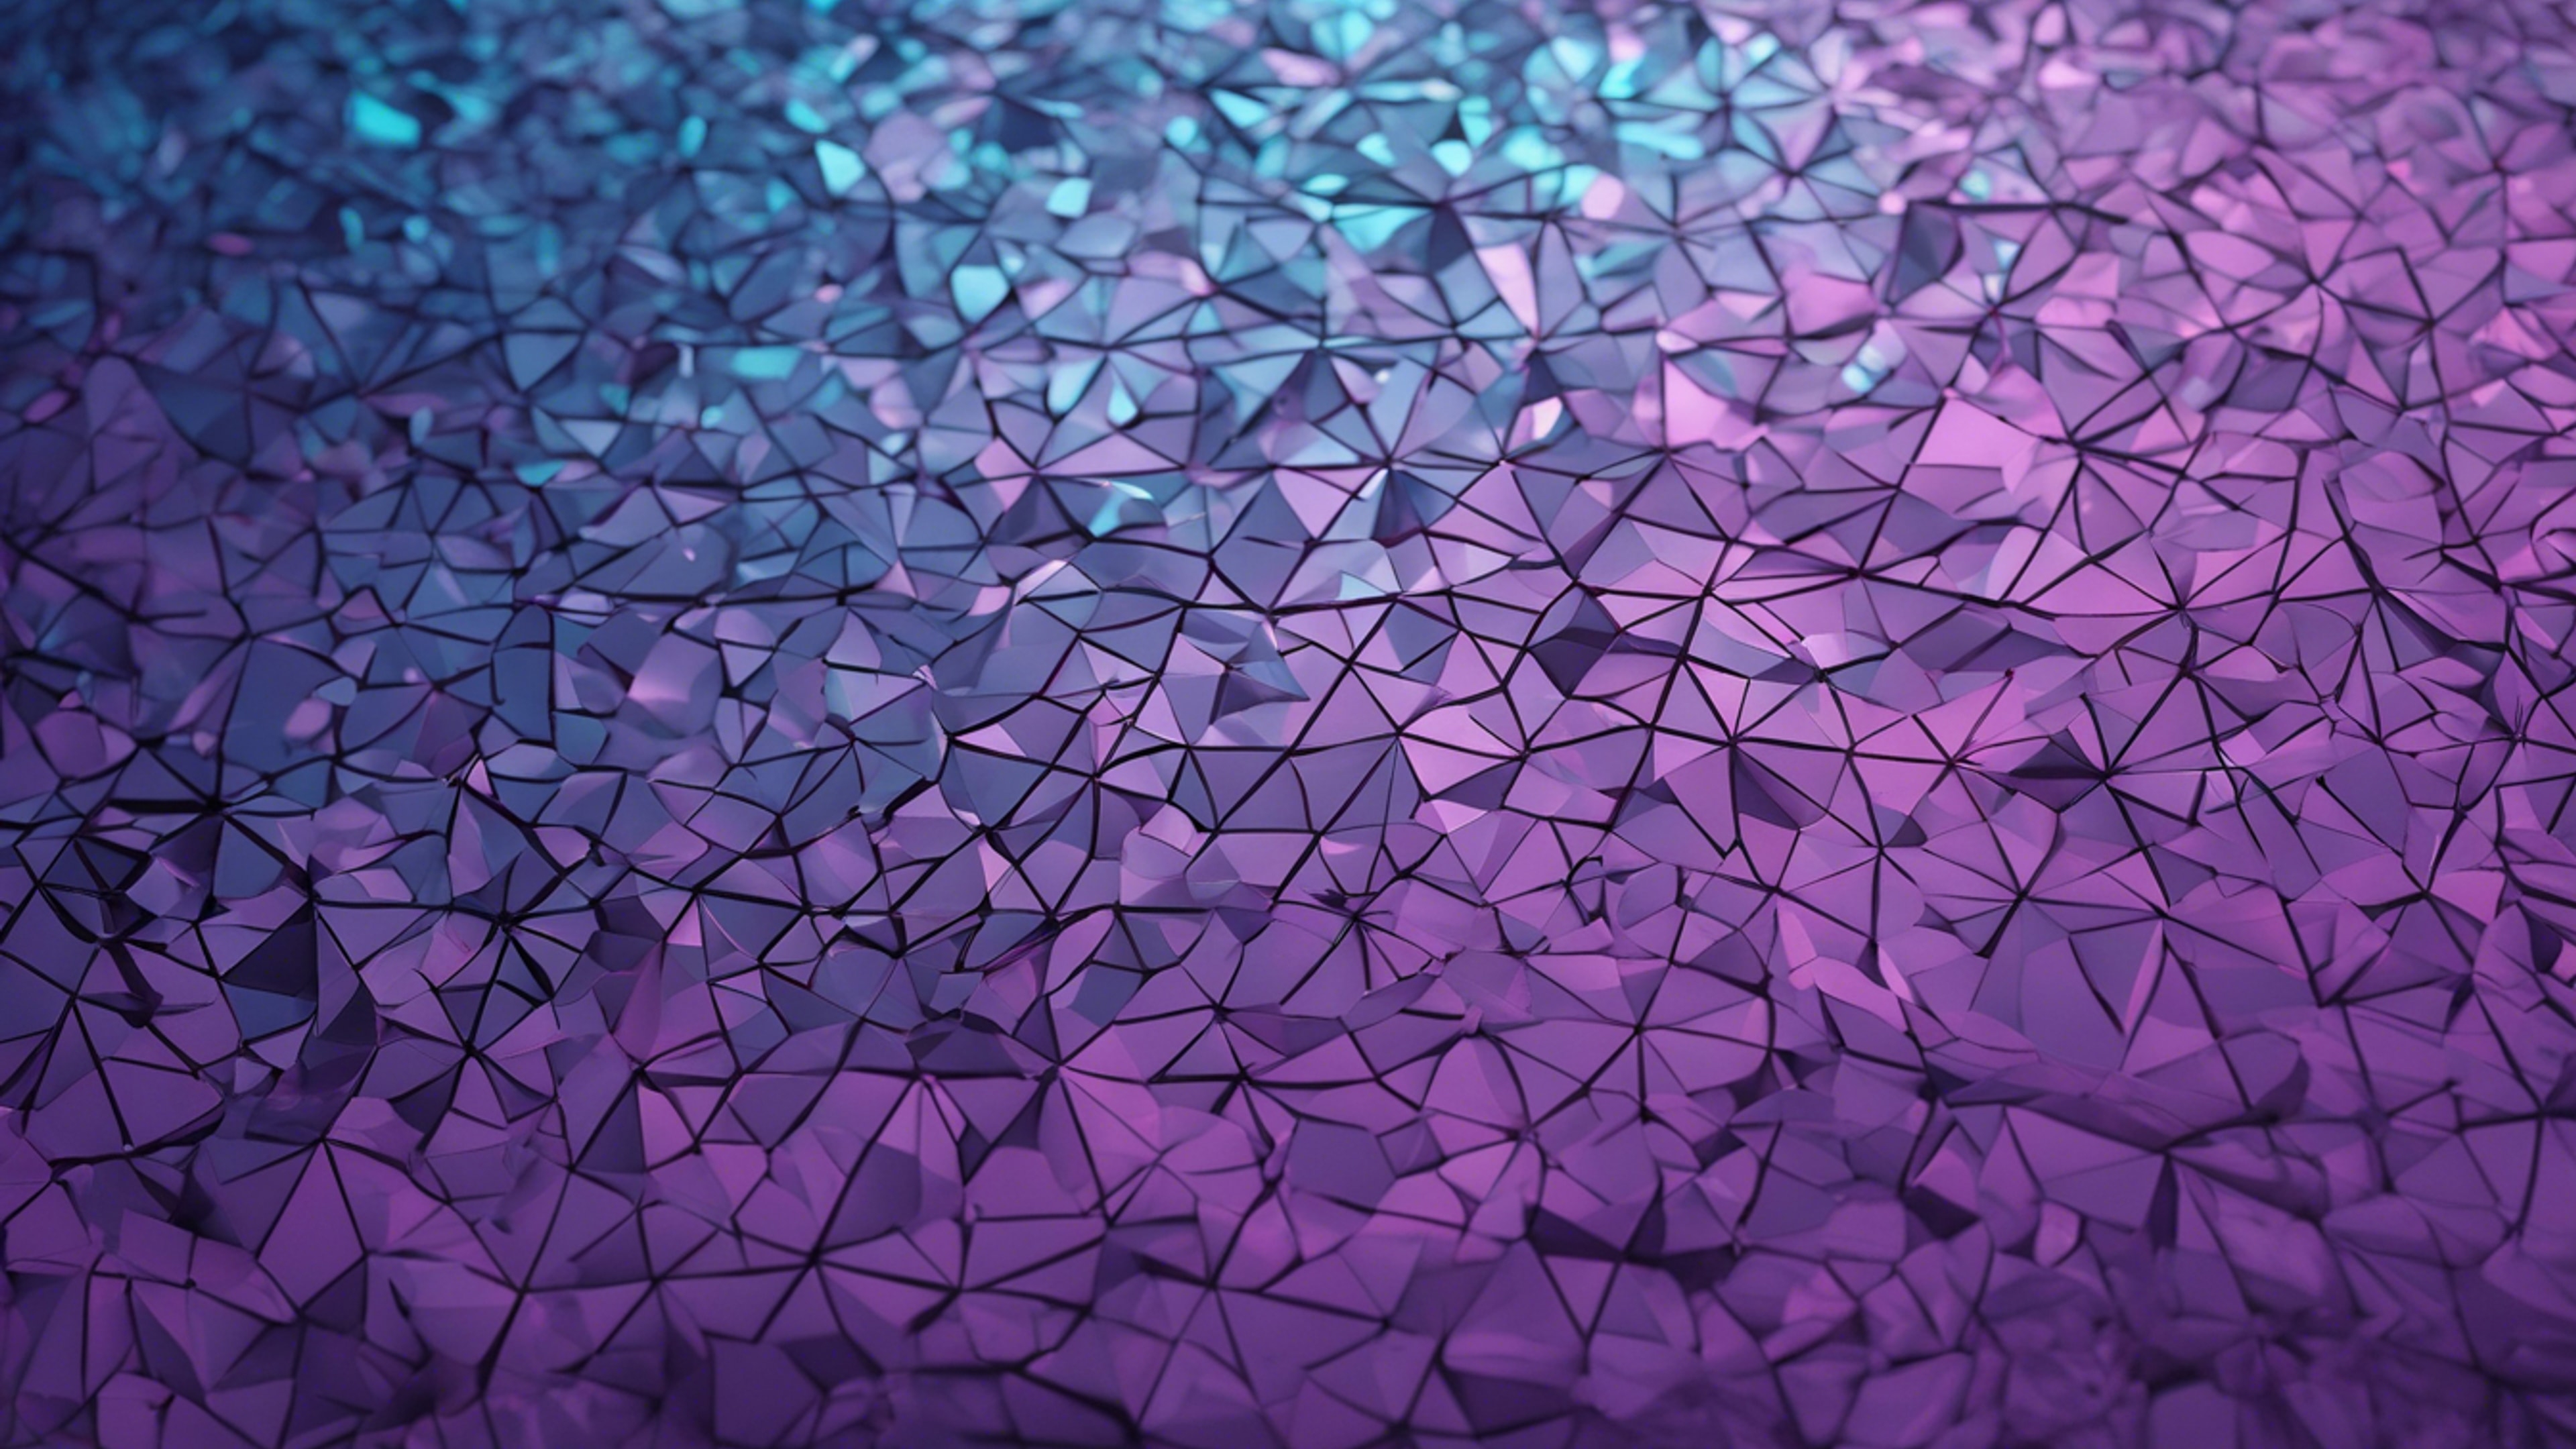 A minimalistic geometric pattern with gradients of cool blues and rich purples. 벽지[0965c8f37dc94faa9227]